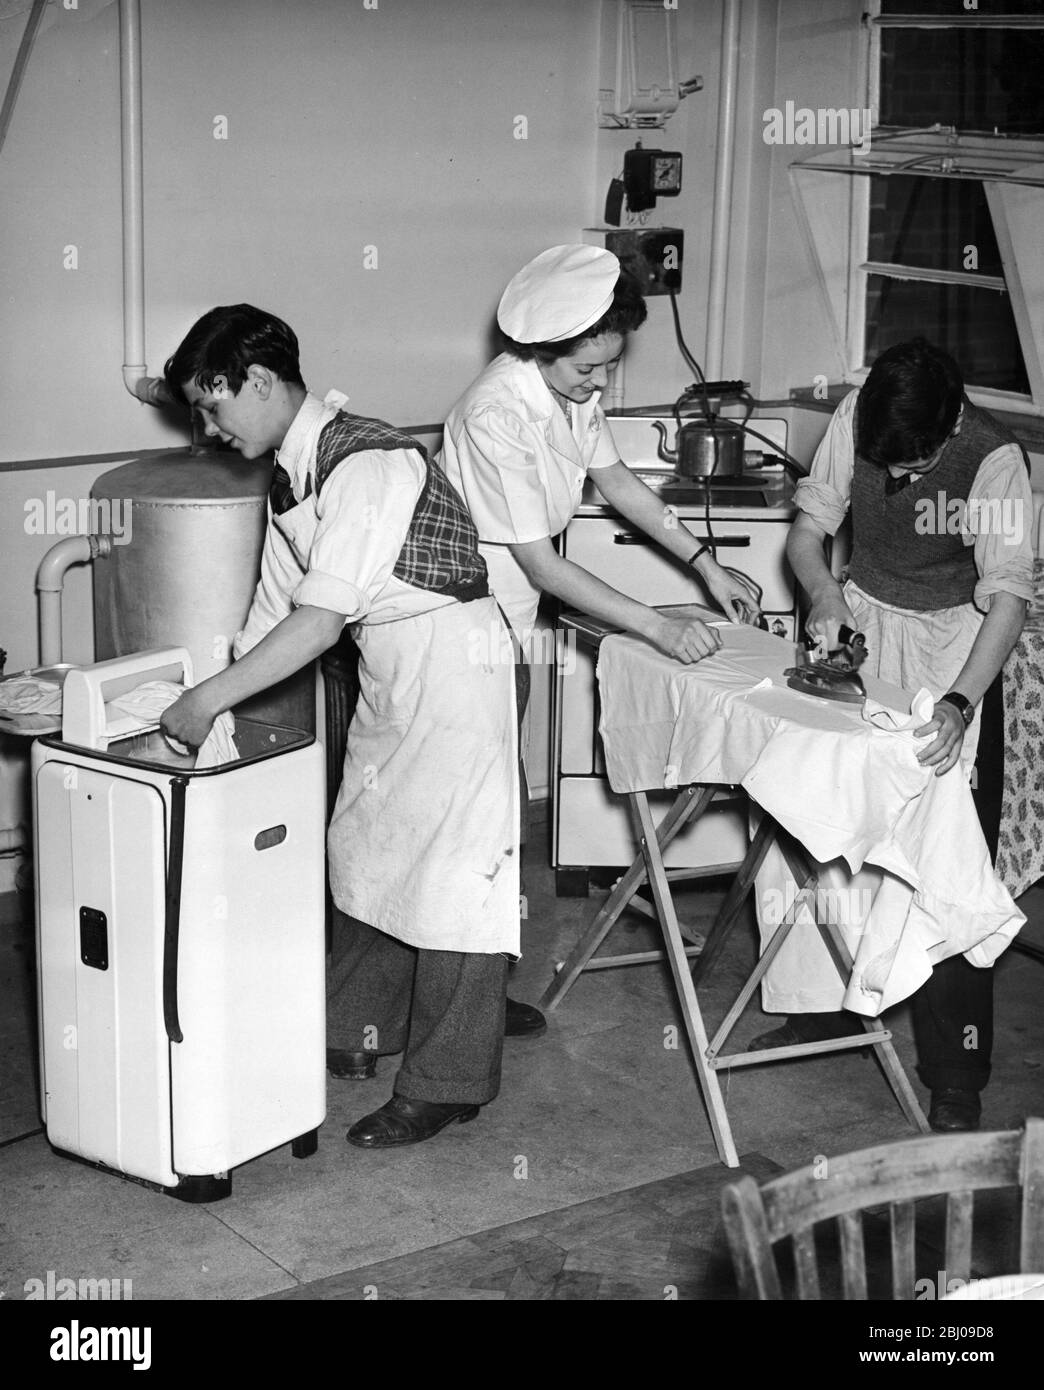 At Arnos Secondary Modern School , Southgate , the pupils reverse the usual order of things during their Friday afternoon handicraft ande domestic science sessions . The boys do cookery and needlework and the girls work in metal and wood . -  Laundry lads ; two of the boys find that doing the washing can be fun . Left to right John Pettit of Muswell Hill (14 ) ; Instructress , Mrs K Armitage of Palmers Green ; and John Baily , 15 of Southgate - 22nd November 1950 Stock Photo